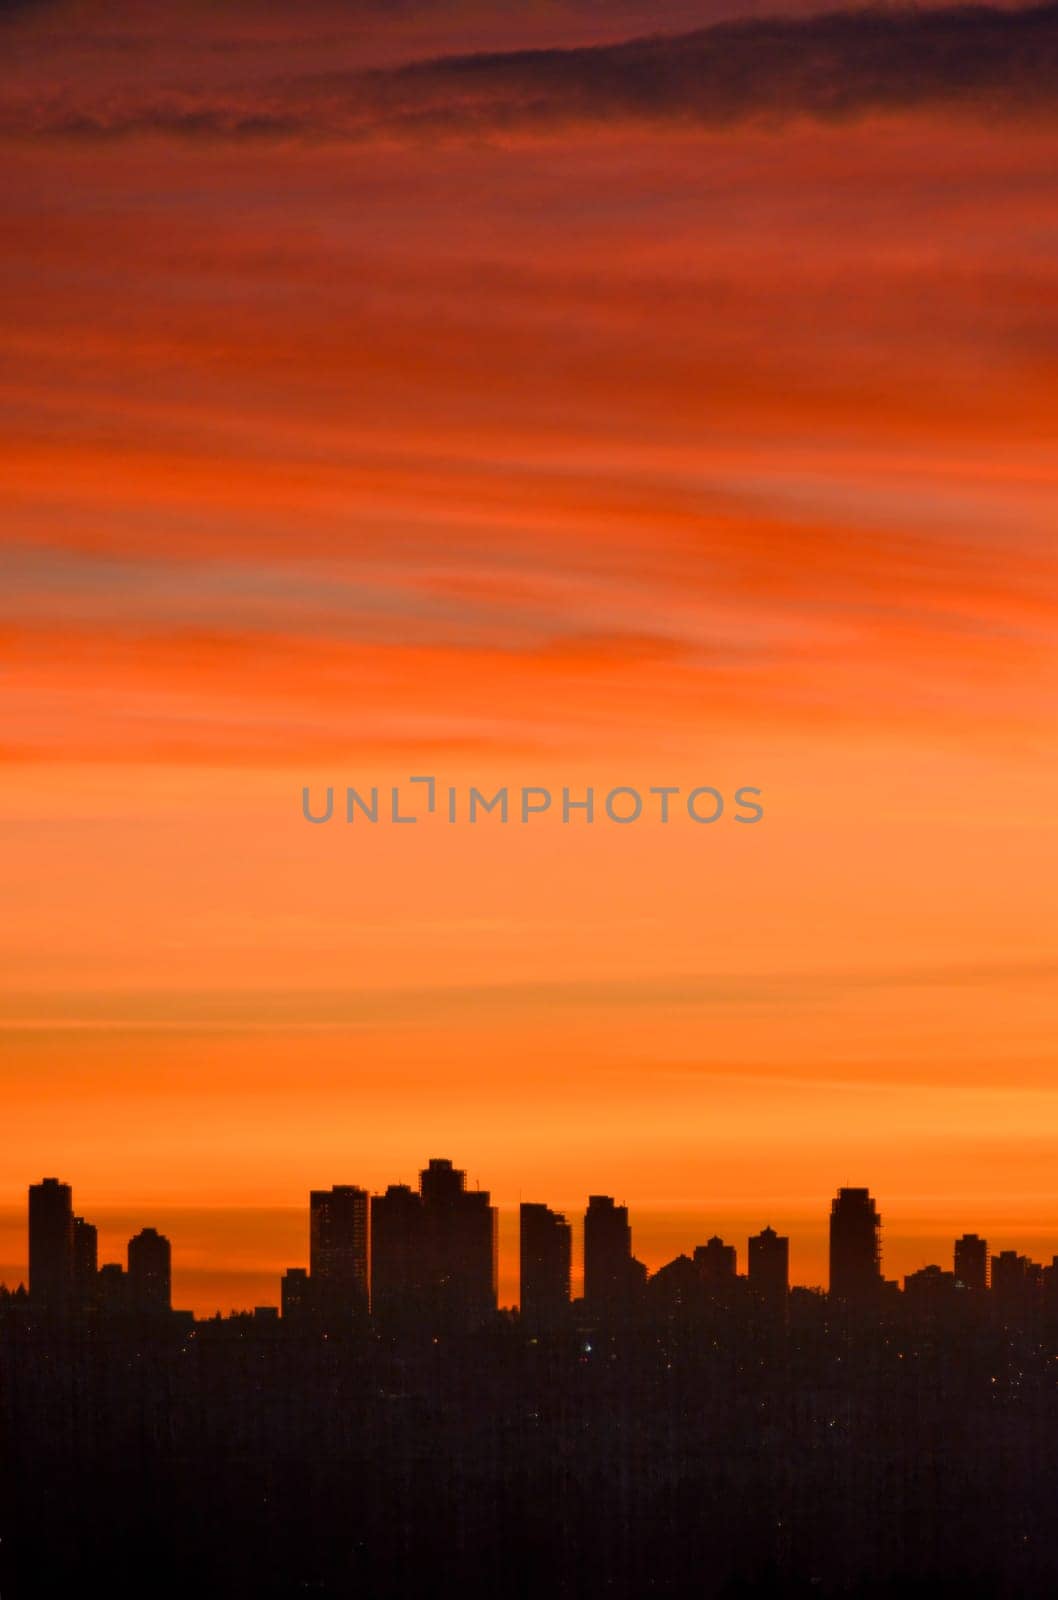 Urban silhouette of buildings on sunset sky background.